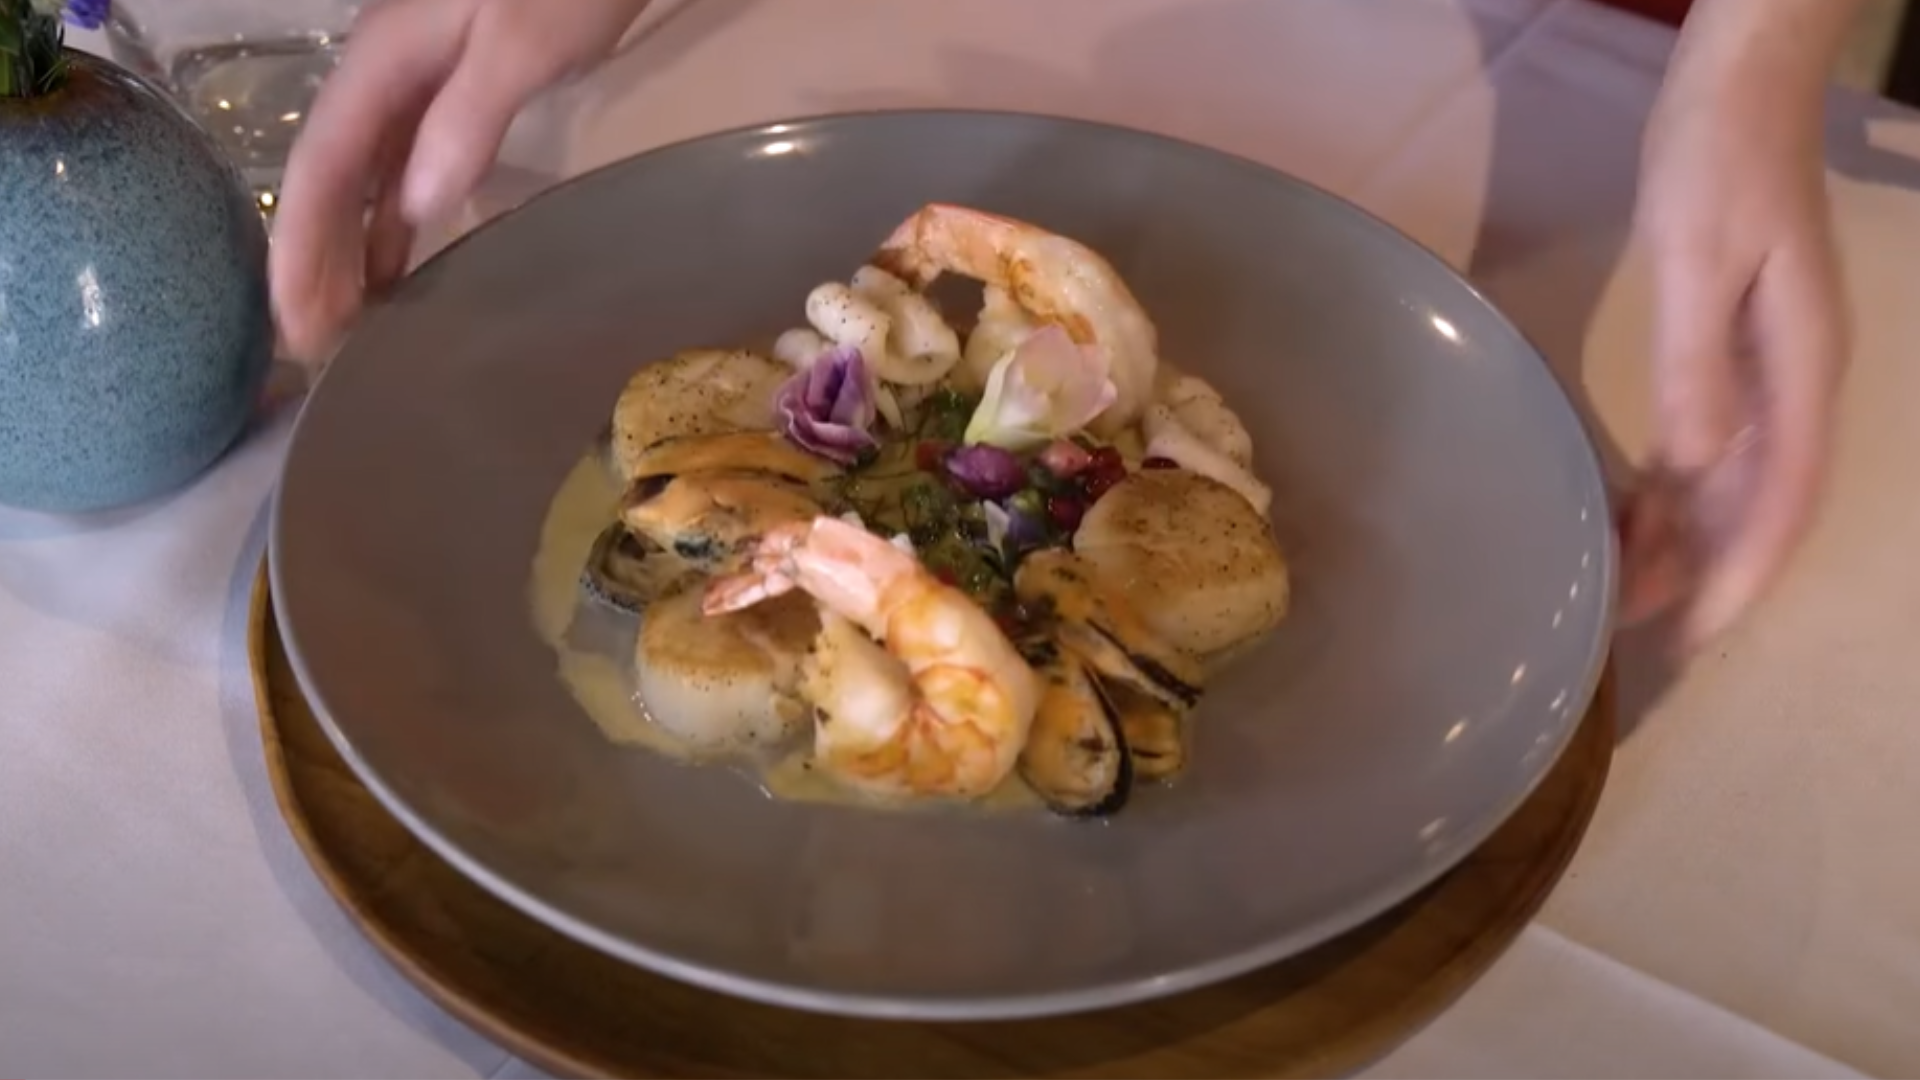 11Alive joined Executive Chef and owner Nahm Thongyoung in the kitchen for an exploration of the many flavors of Thai cuisine.